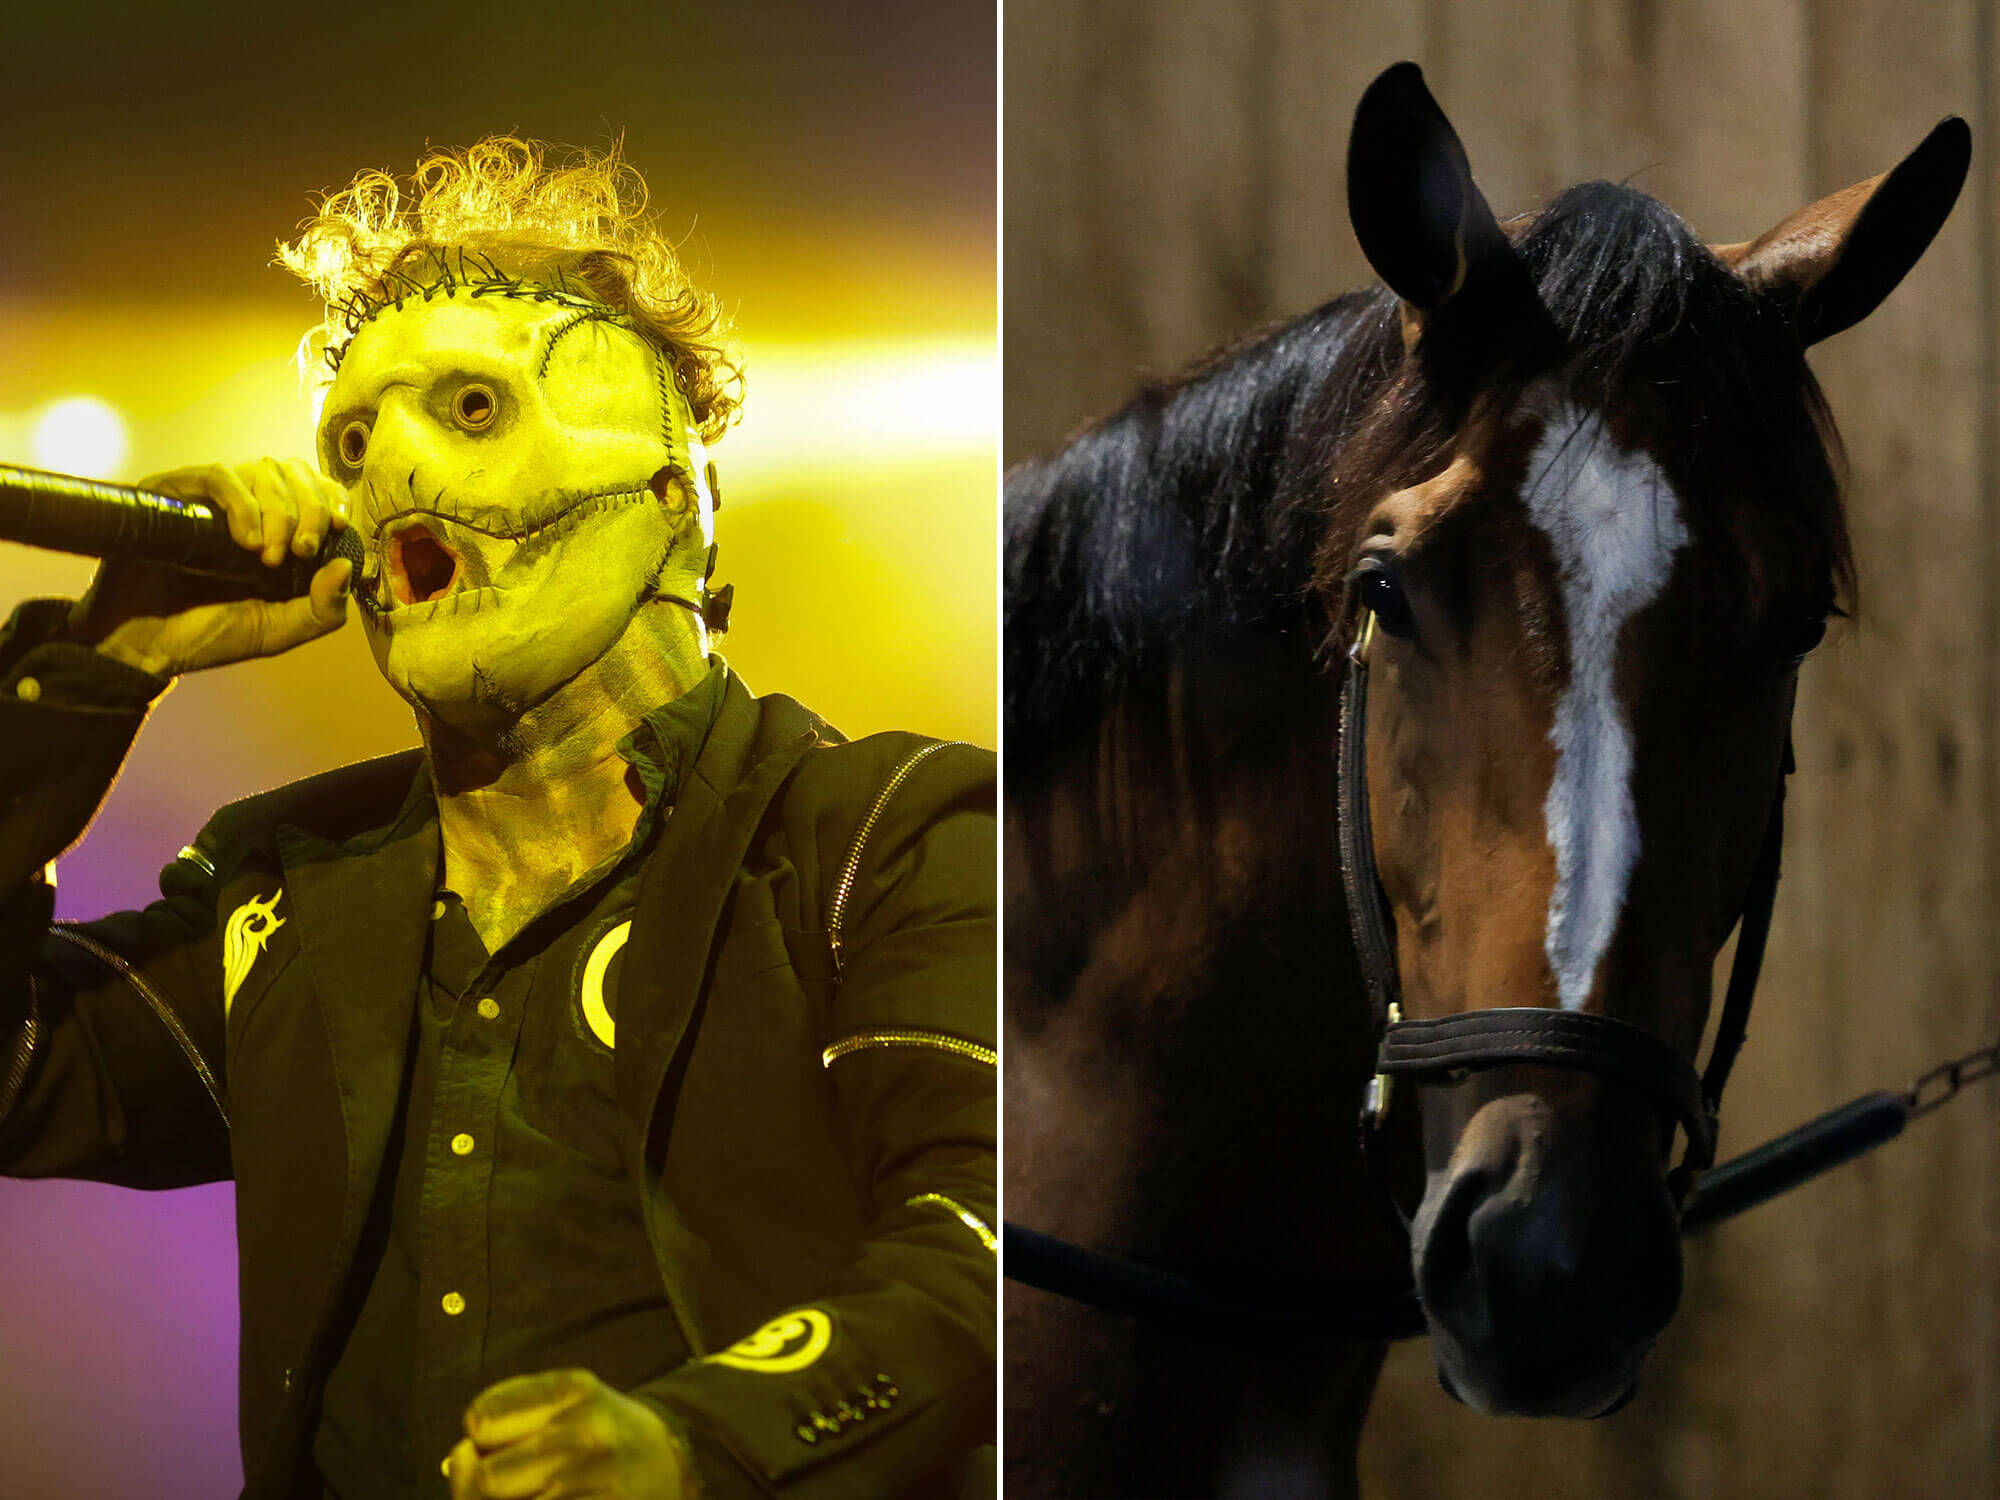 [L-R] Slipknot's Corey Taylor and a horse